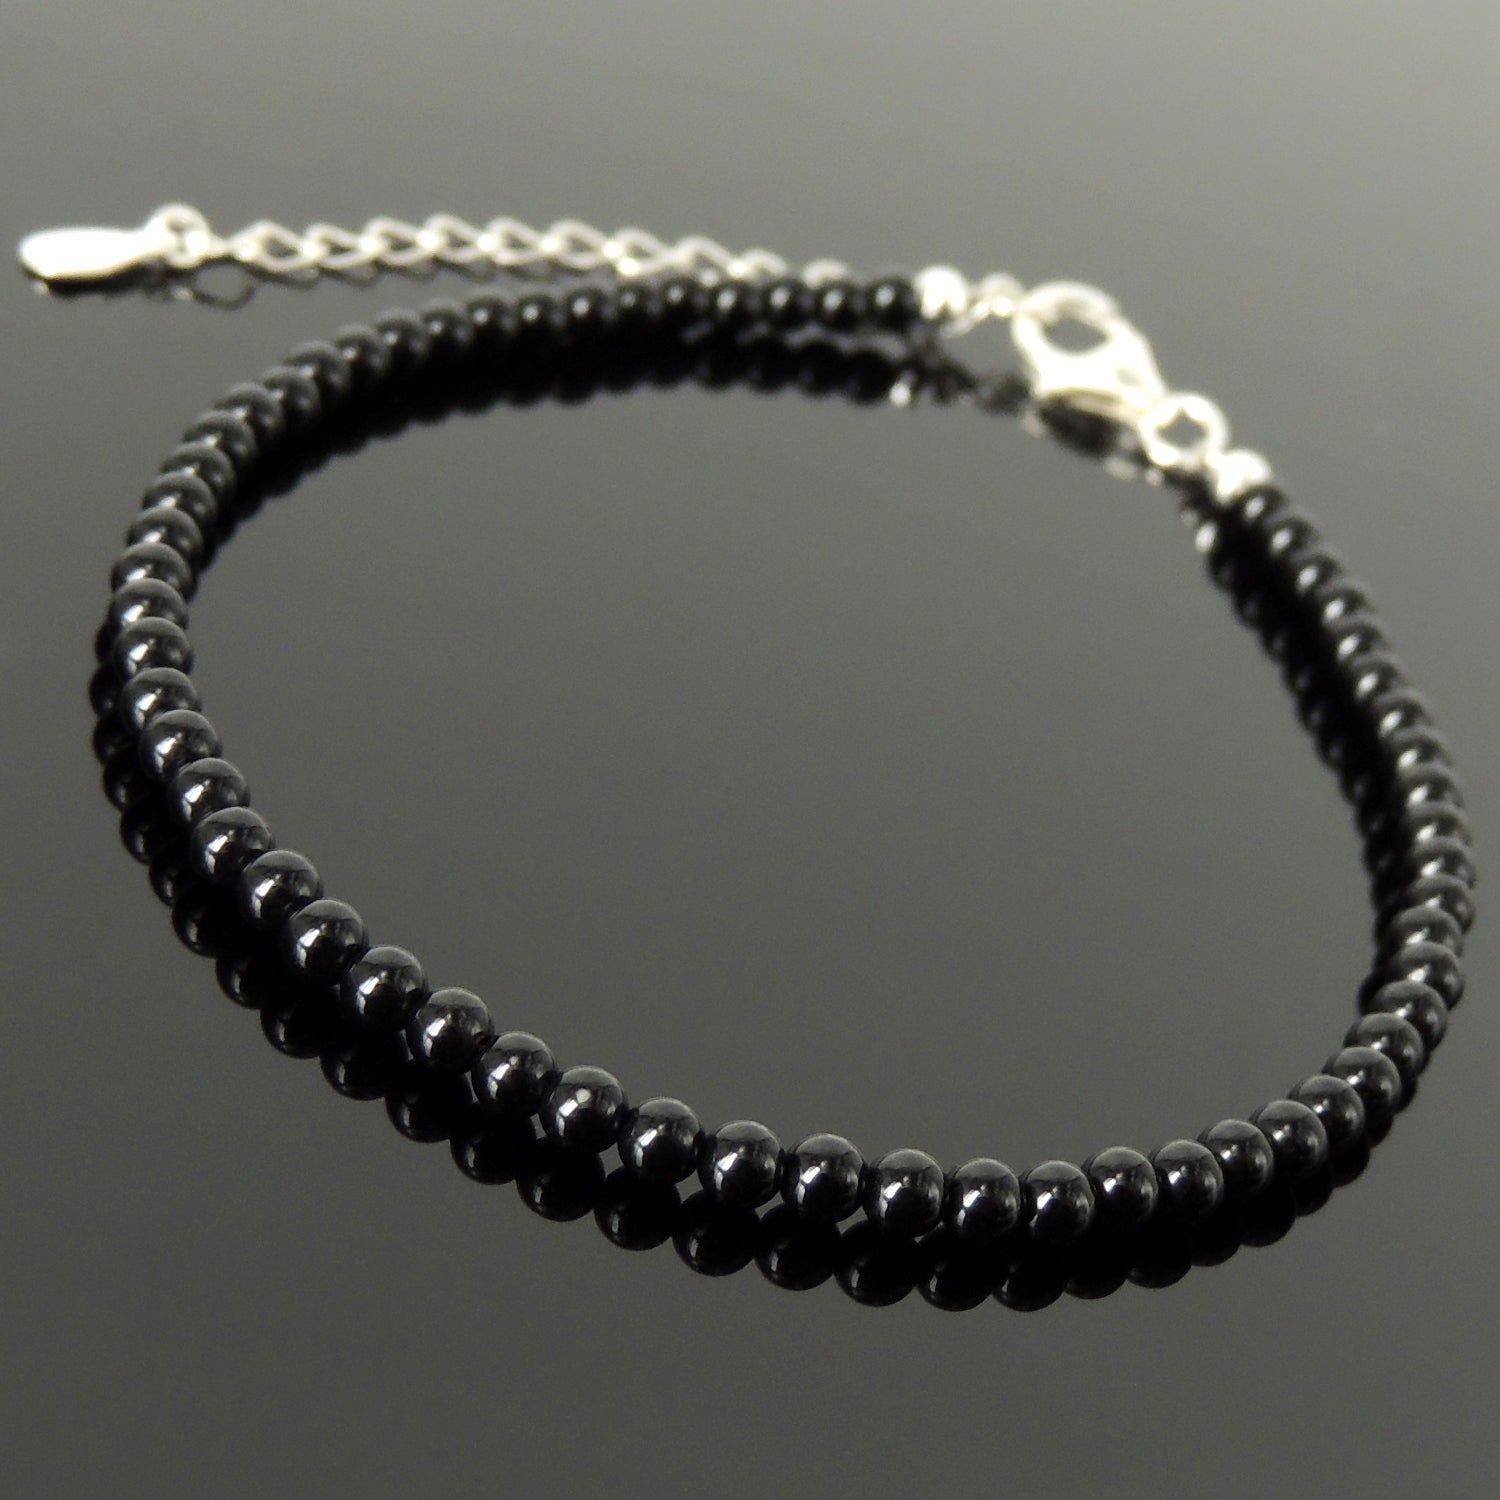 3mm Bright Black Onyx Anklet Healing Gemstones with S925 Sterling Silver Chain & Clasp for Daily Wear, Compassion, Mindfulness, Chakra Meditation AN038